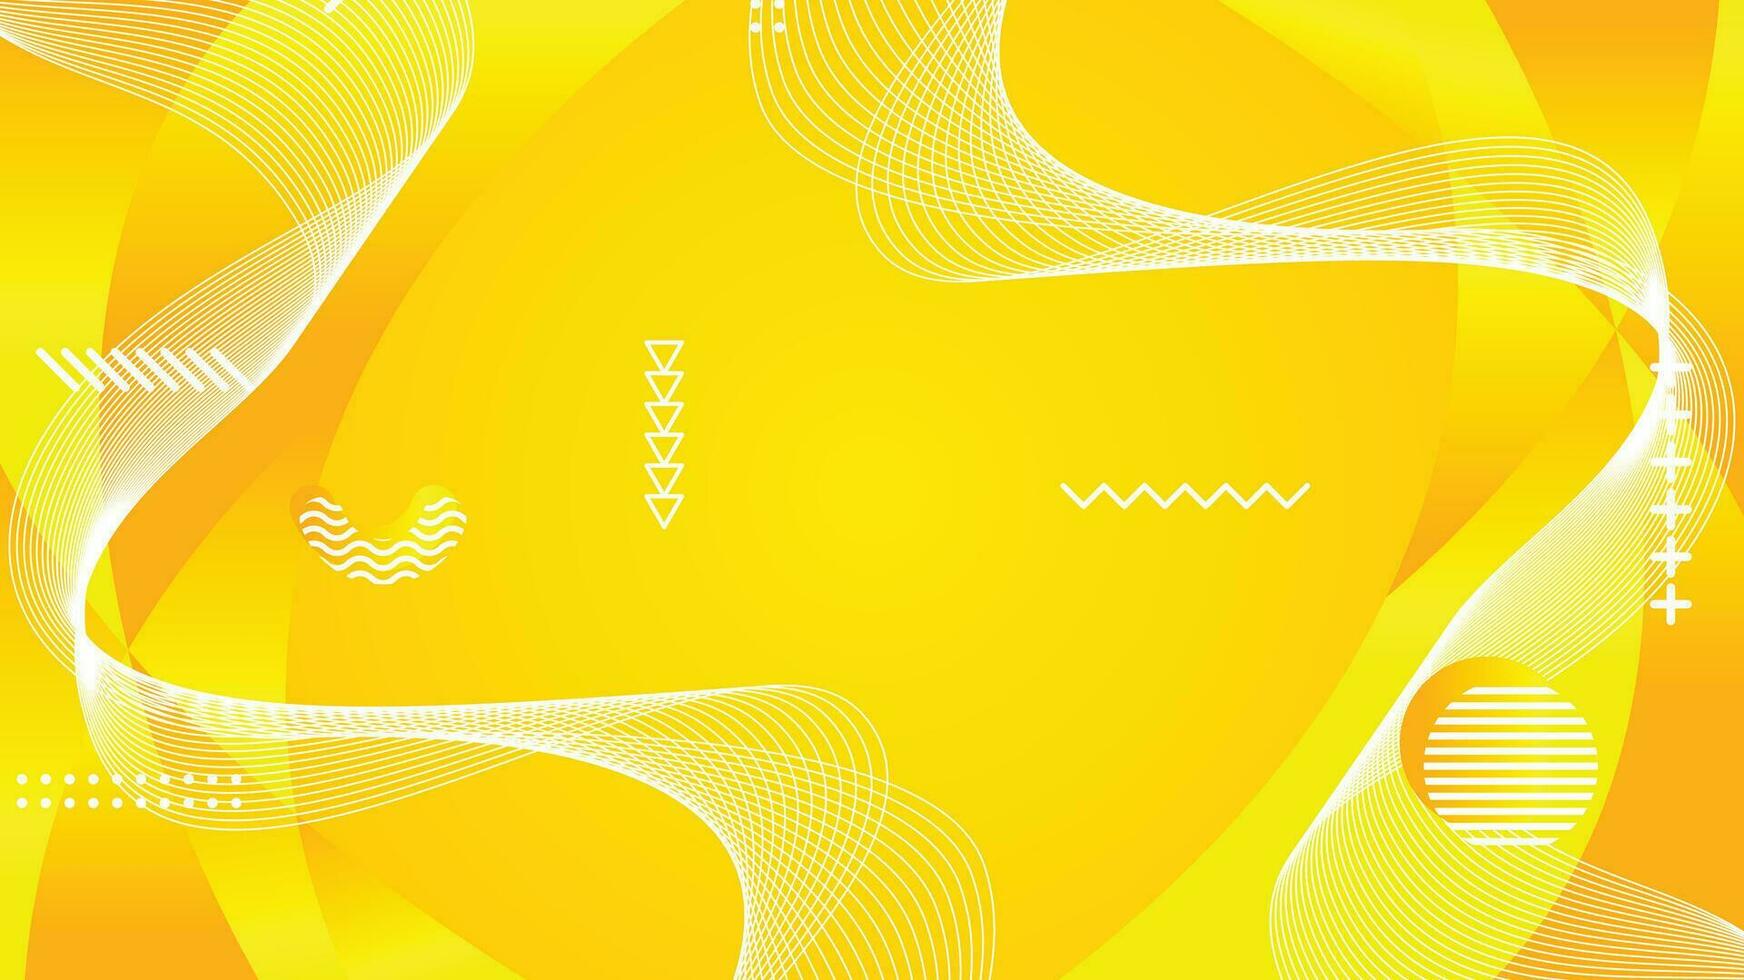 white and yellow fluid shapes abstract background vector